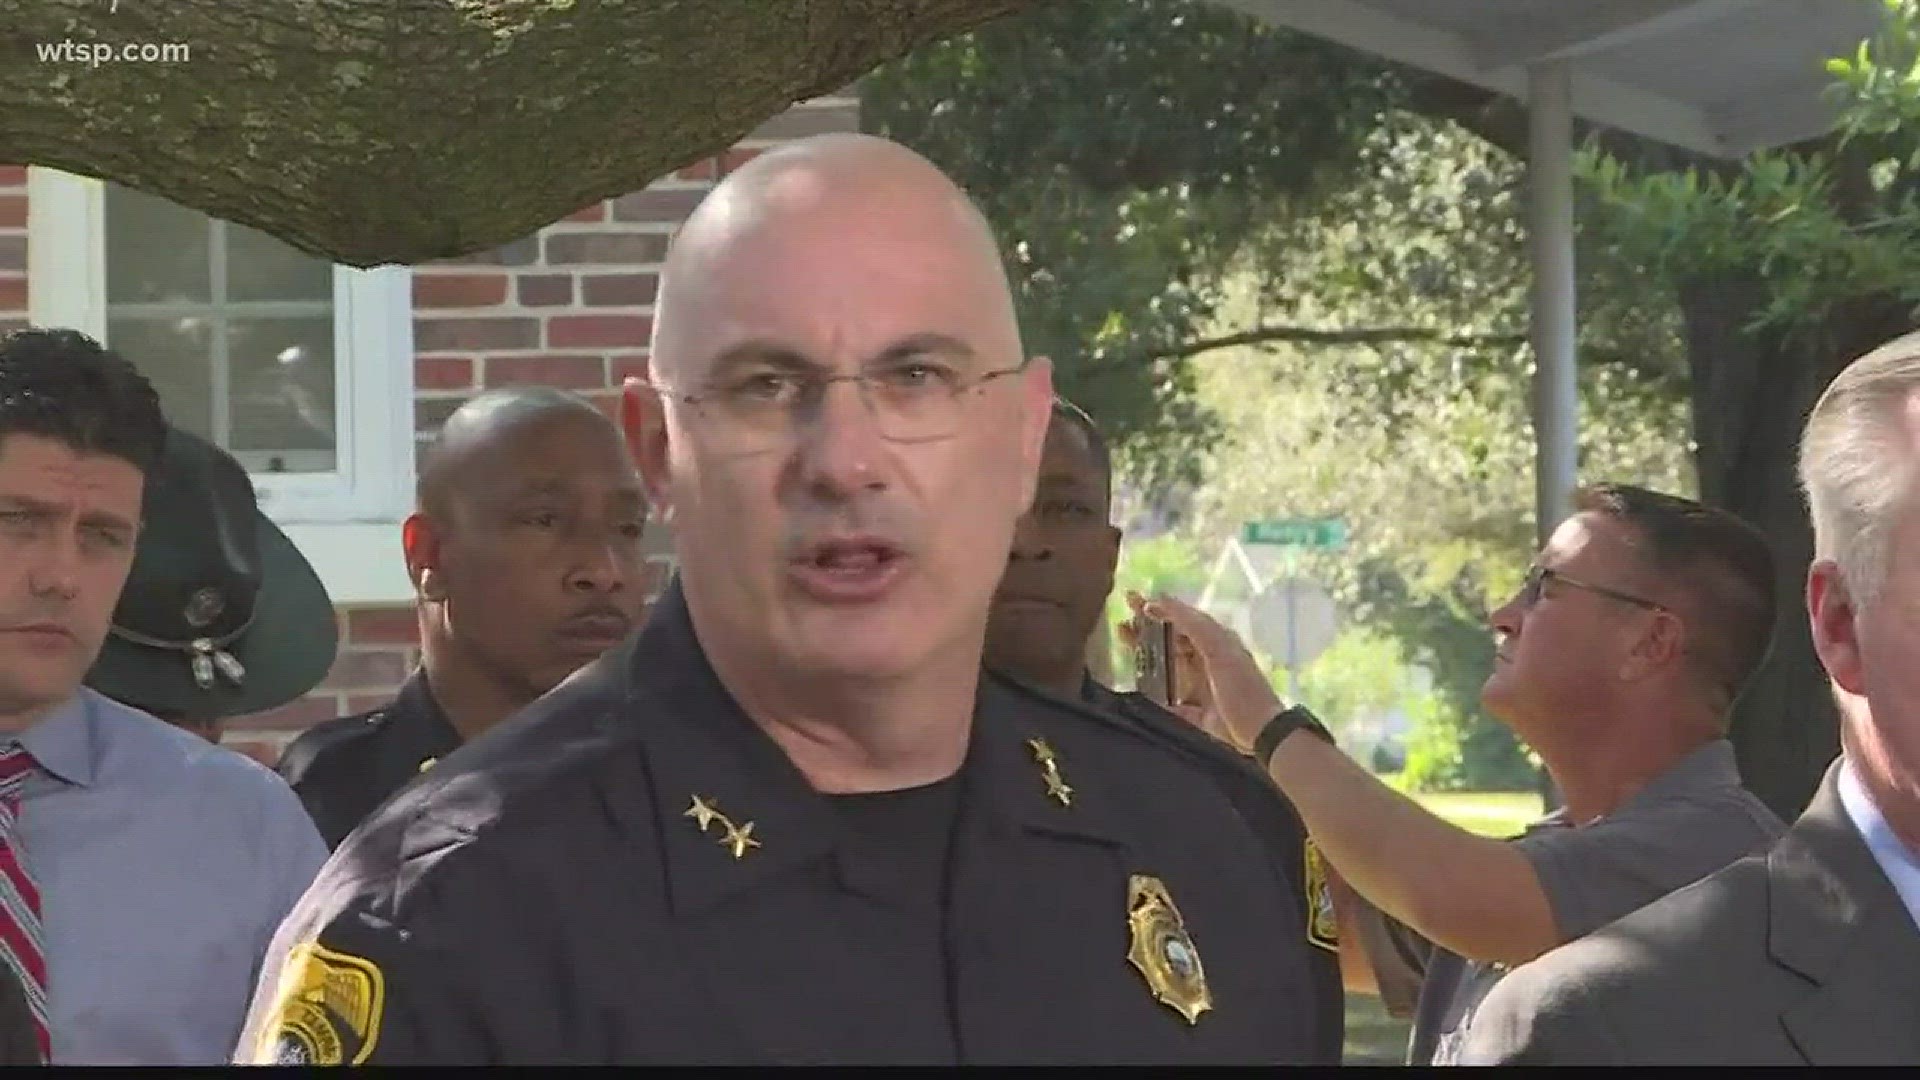 It is day one of healing -- that's what Tampa's police chief said in a news conference following an arrest in the Seminole Heights murders.